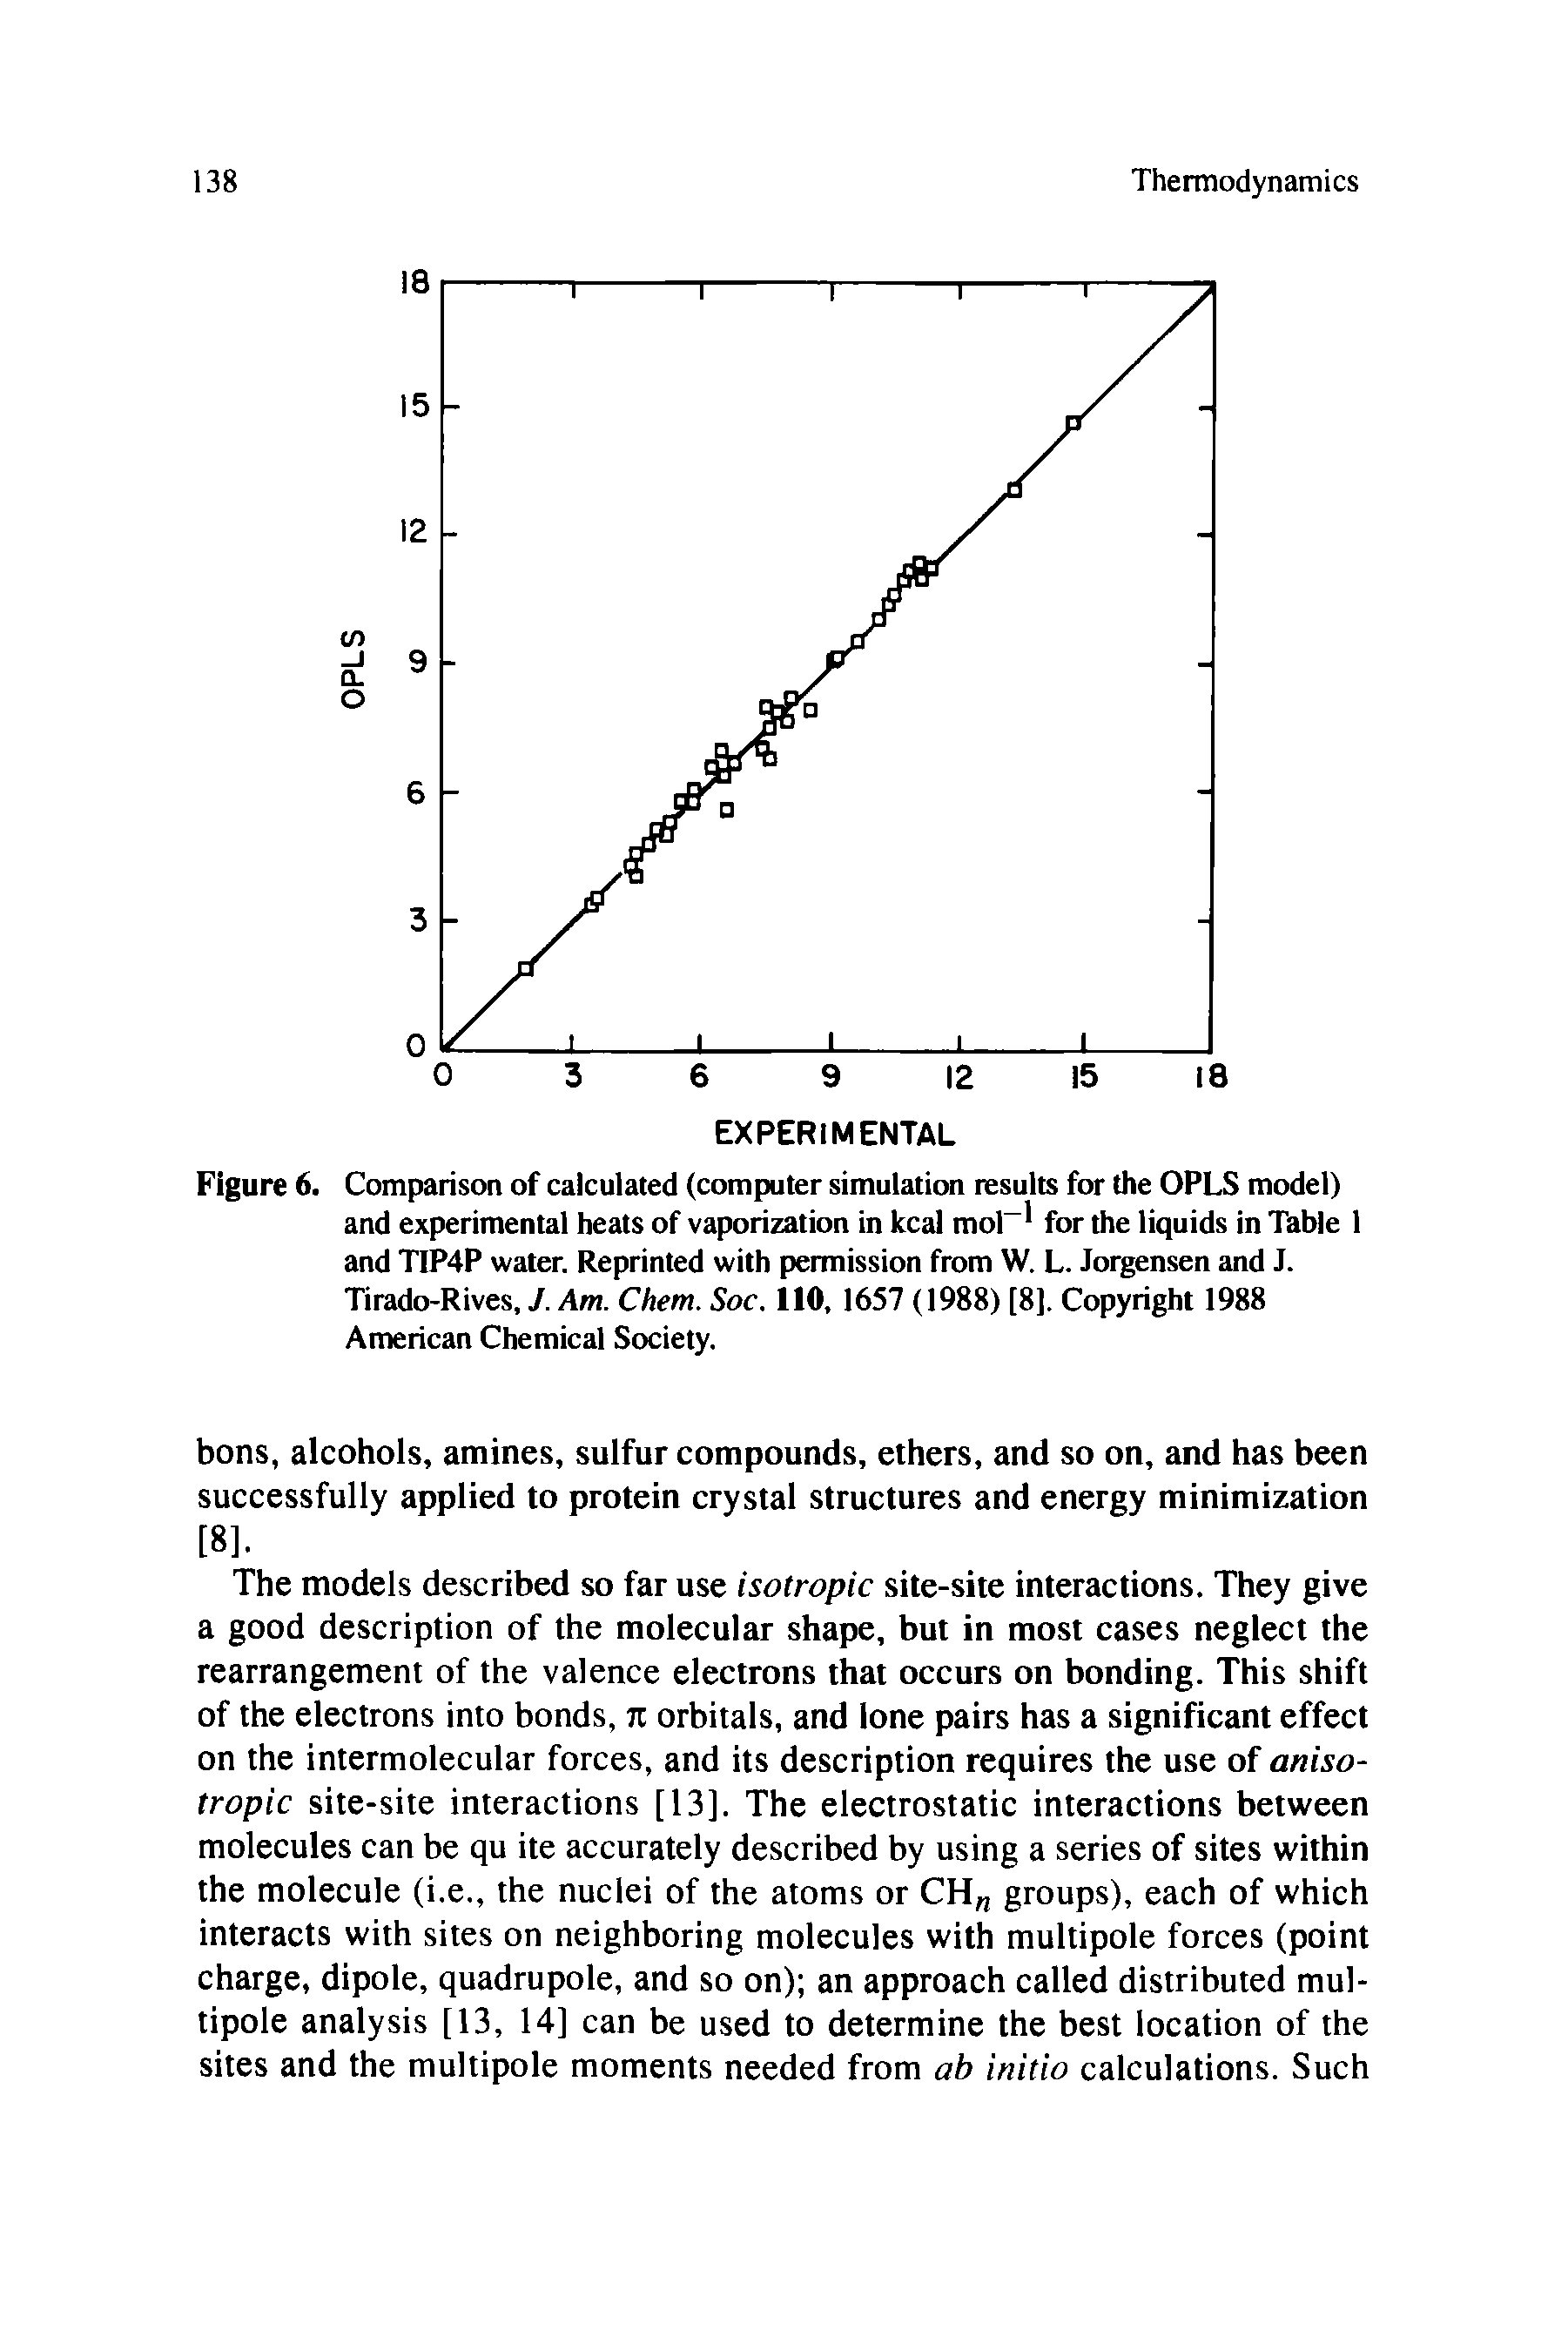 Figure 6. Comparison of calculated (computer simulation results for the OPLS model) and experimental heats of vaporization in kcal mol- for the liquids in Table 1 and TIP4P water. Reprinted with permission from W. L. Jorgensen and J. Tirado-Rives, J. Am. Chem. Soc. 110, 1657 (1988) [8], Copyright 1988 American Chemical Society.